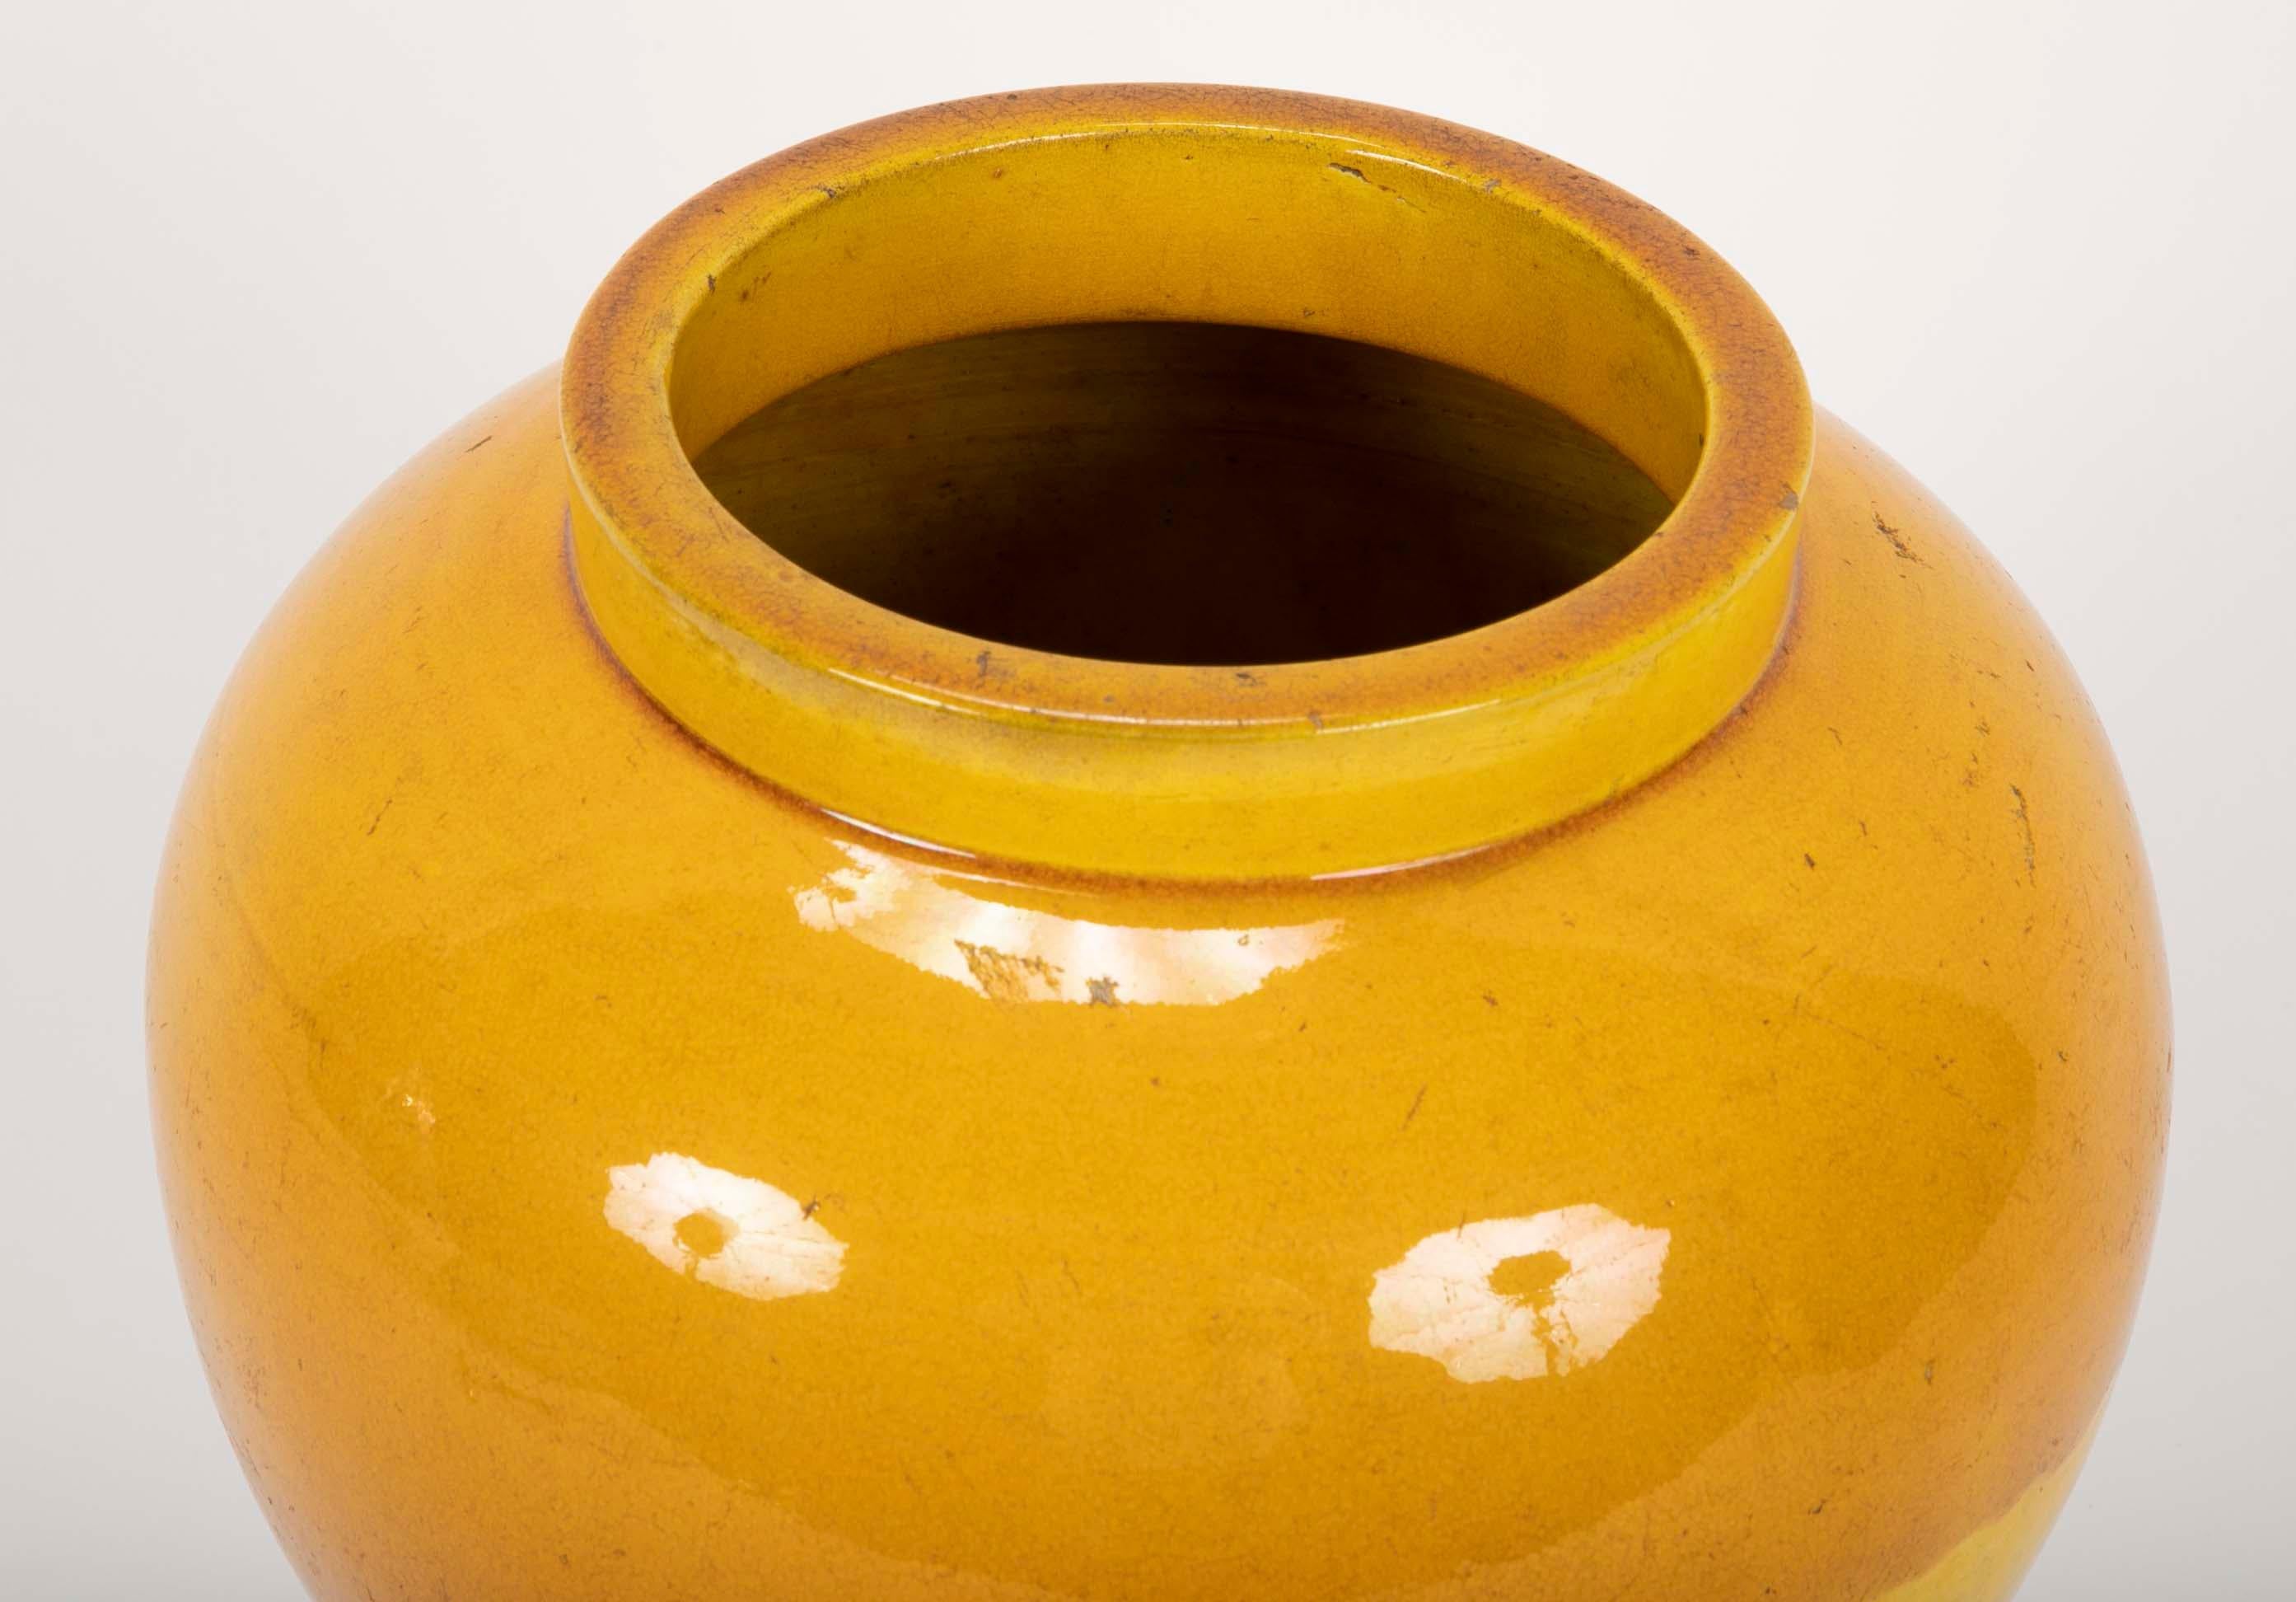 Japanese glazed ceramic vase in form similar to a Chinese ginger jar. The beautiful yellow glaze with a rich caramel over-glaze on the top part of the jar. A wonderful shape and stunning color. Though dating from the late 19th century this vase has